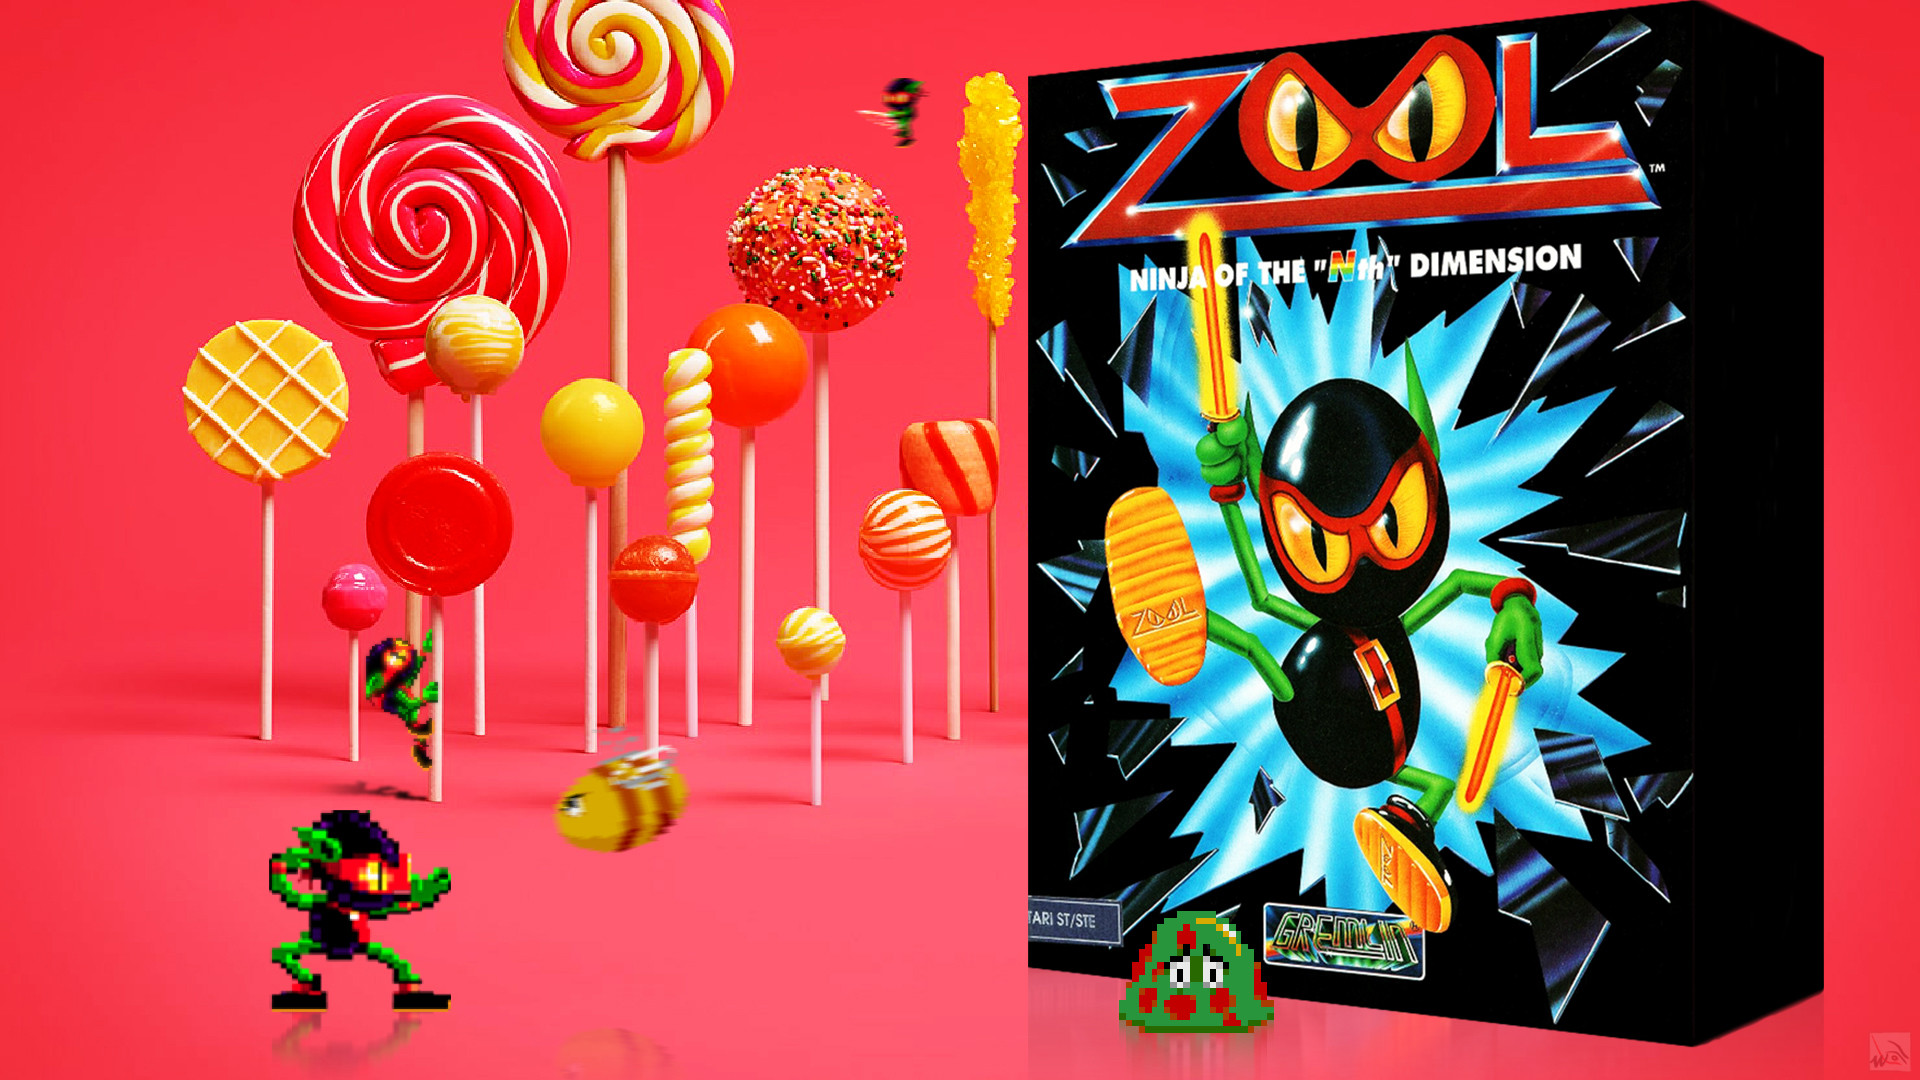 1920x1080 “Zool” is a plateform game released in 1993 on Atari ST and published by  Gremlin Graphics. Download wallpaper (1920 * 1080)